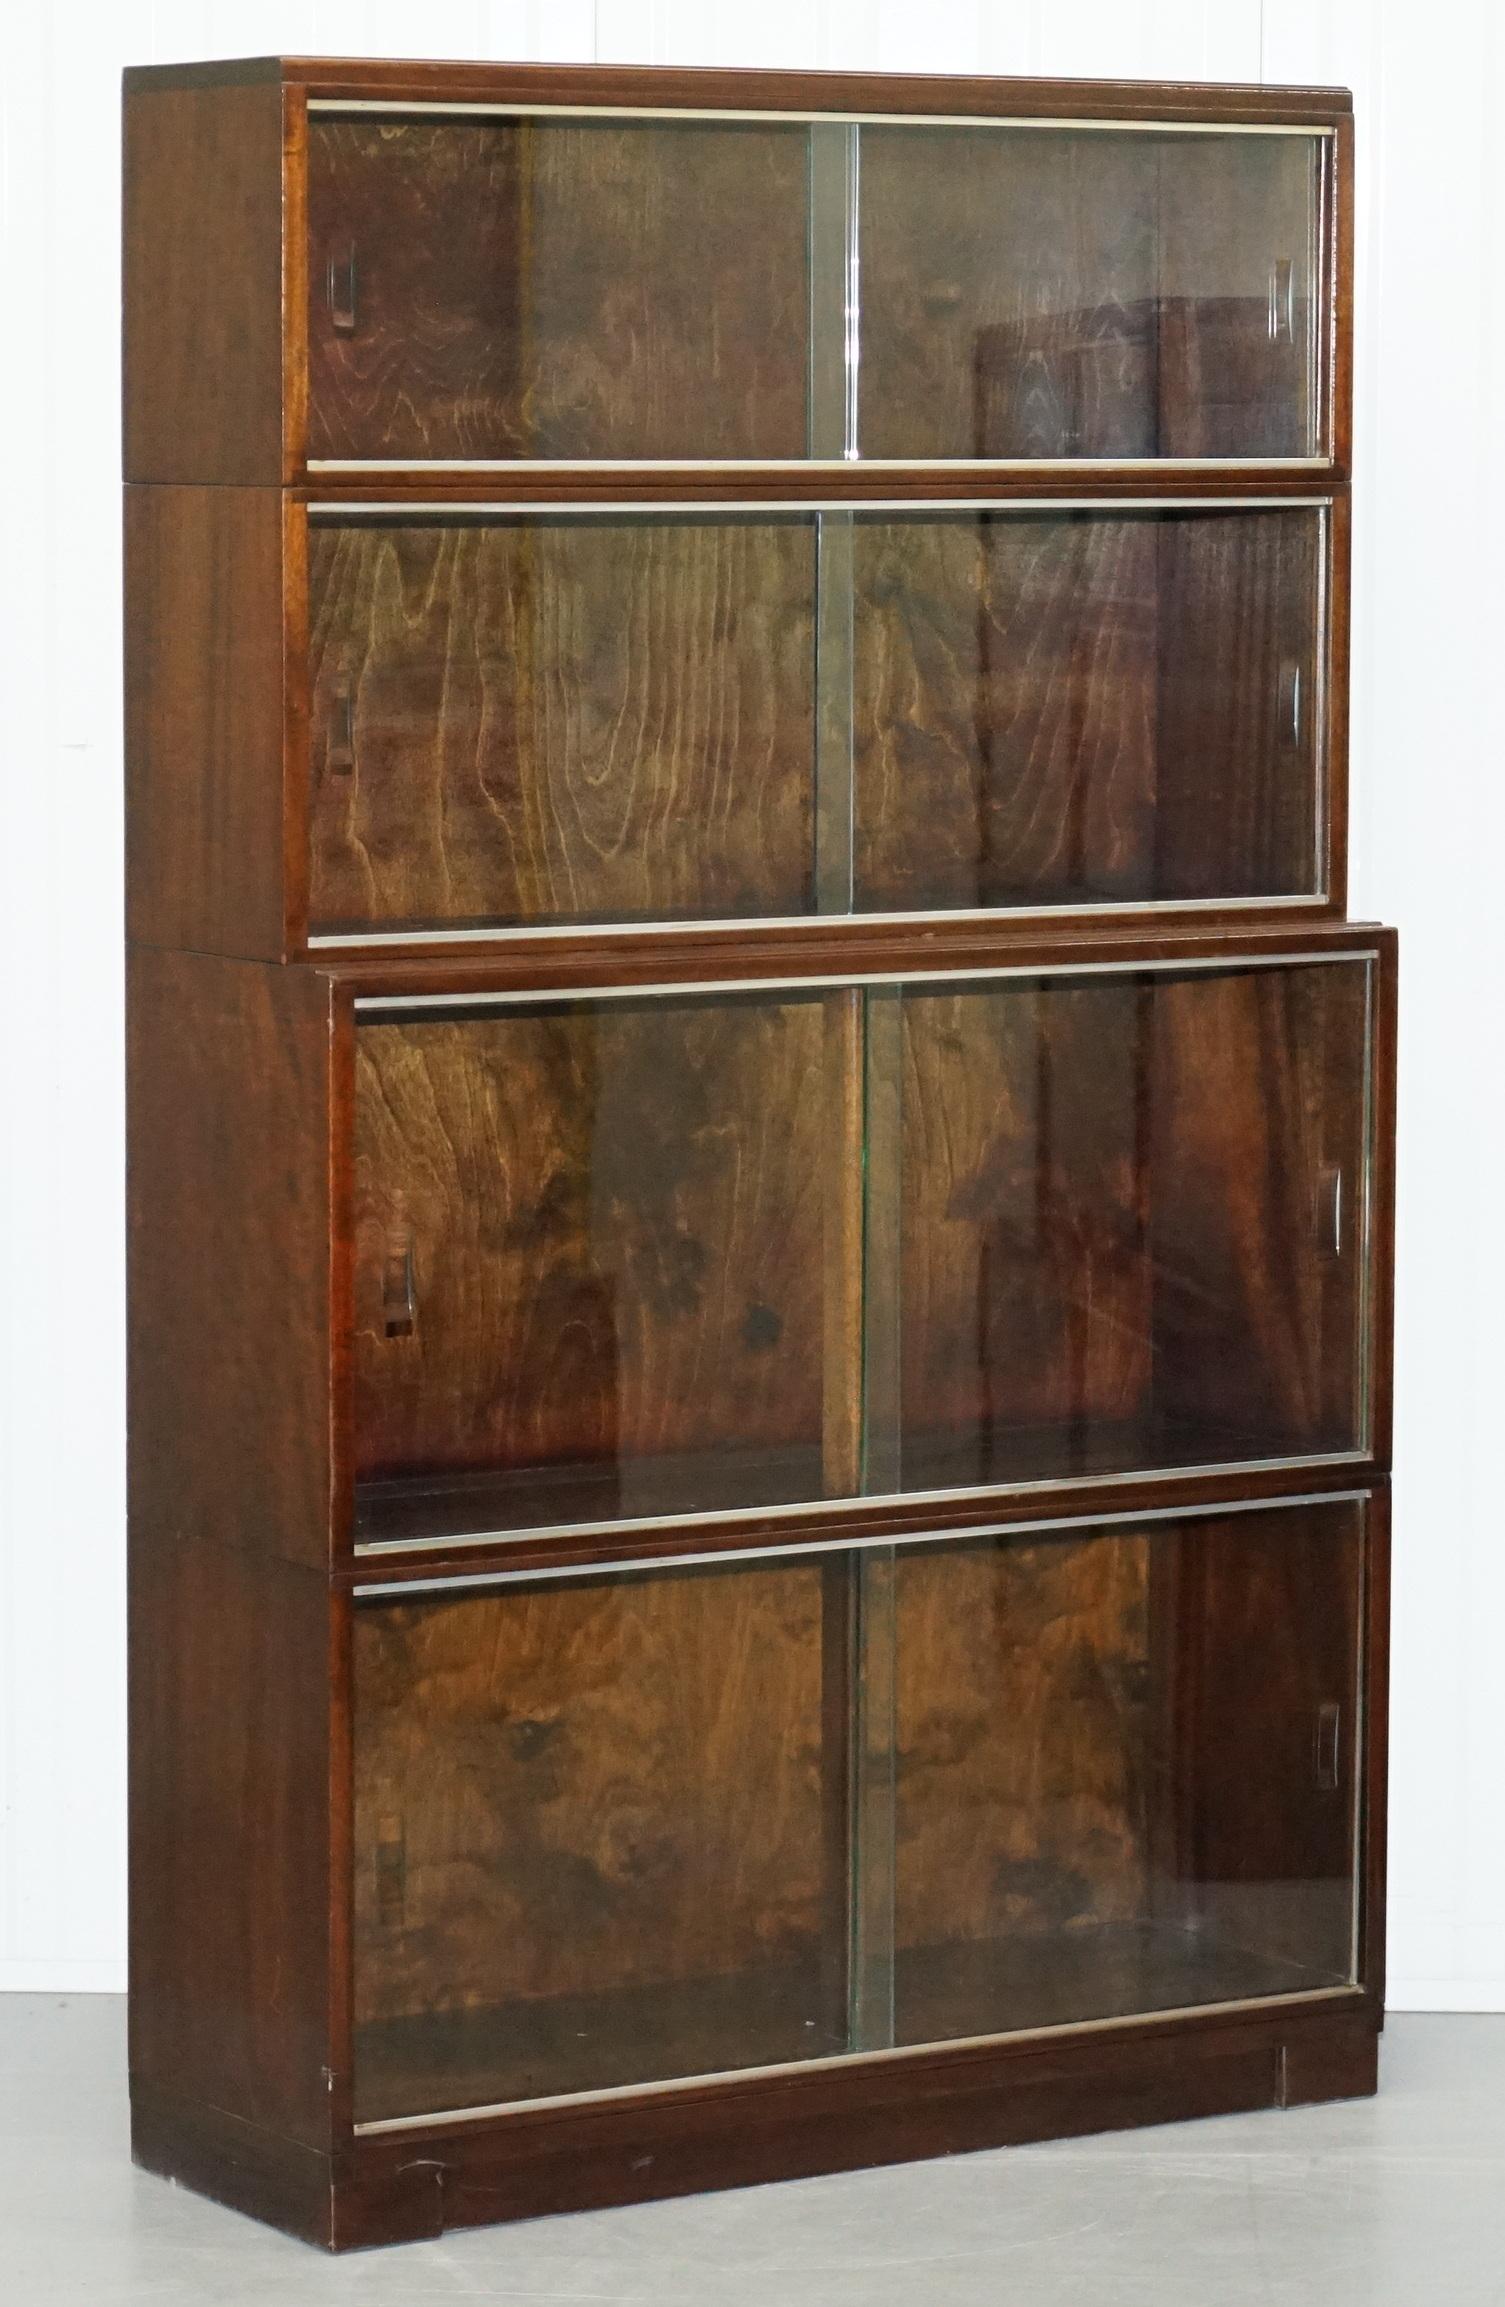 We are delighted to offer for sale this stunning suite of three Minty Oxford Legal modular stacking bookcases with glass doors.

A good looking well made and versatile set, modular bookcases break down into different sections so you can adjust the